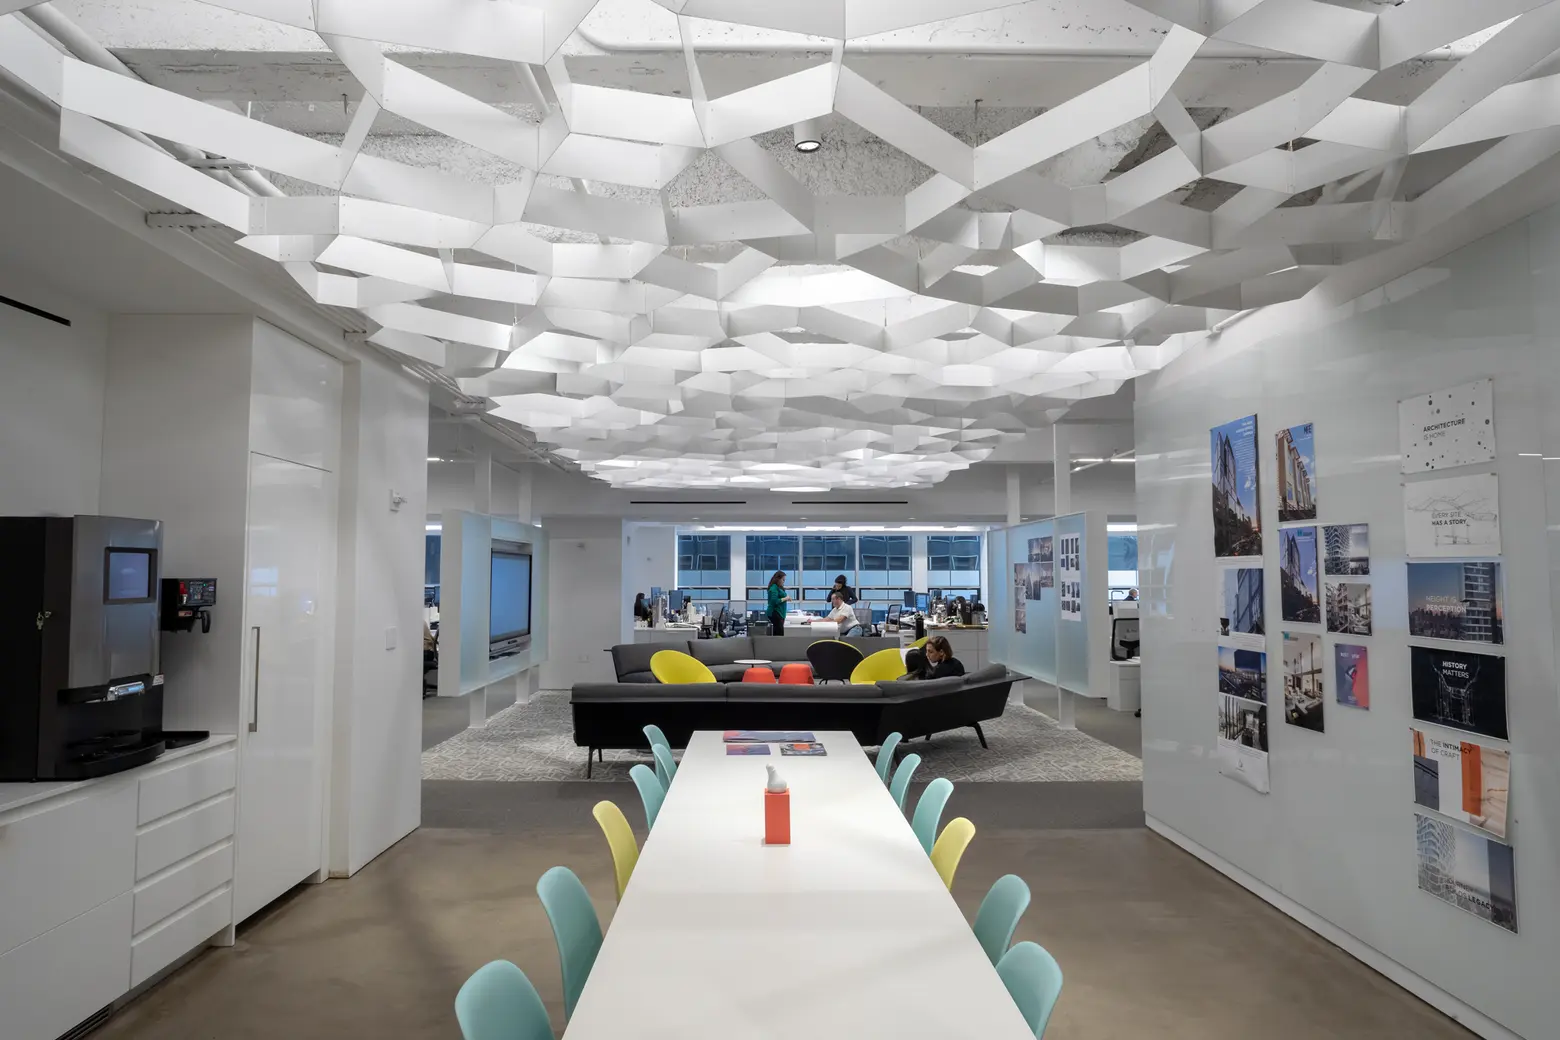 Where I Work: Architecture and interiors firm CetraRuddy shows off their self-designed offices